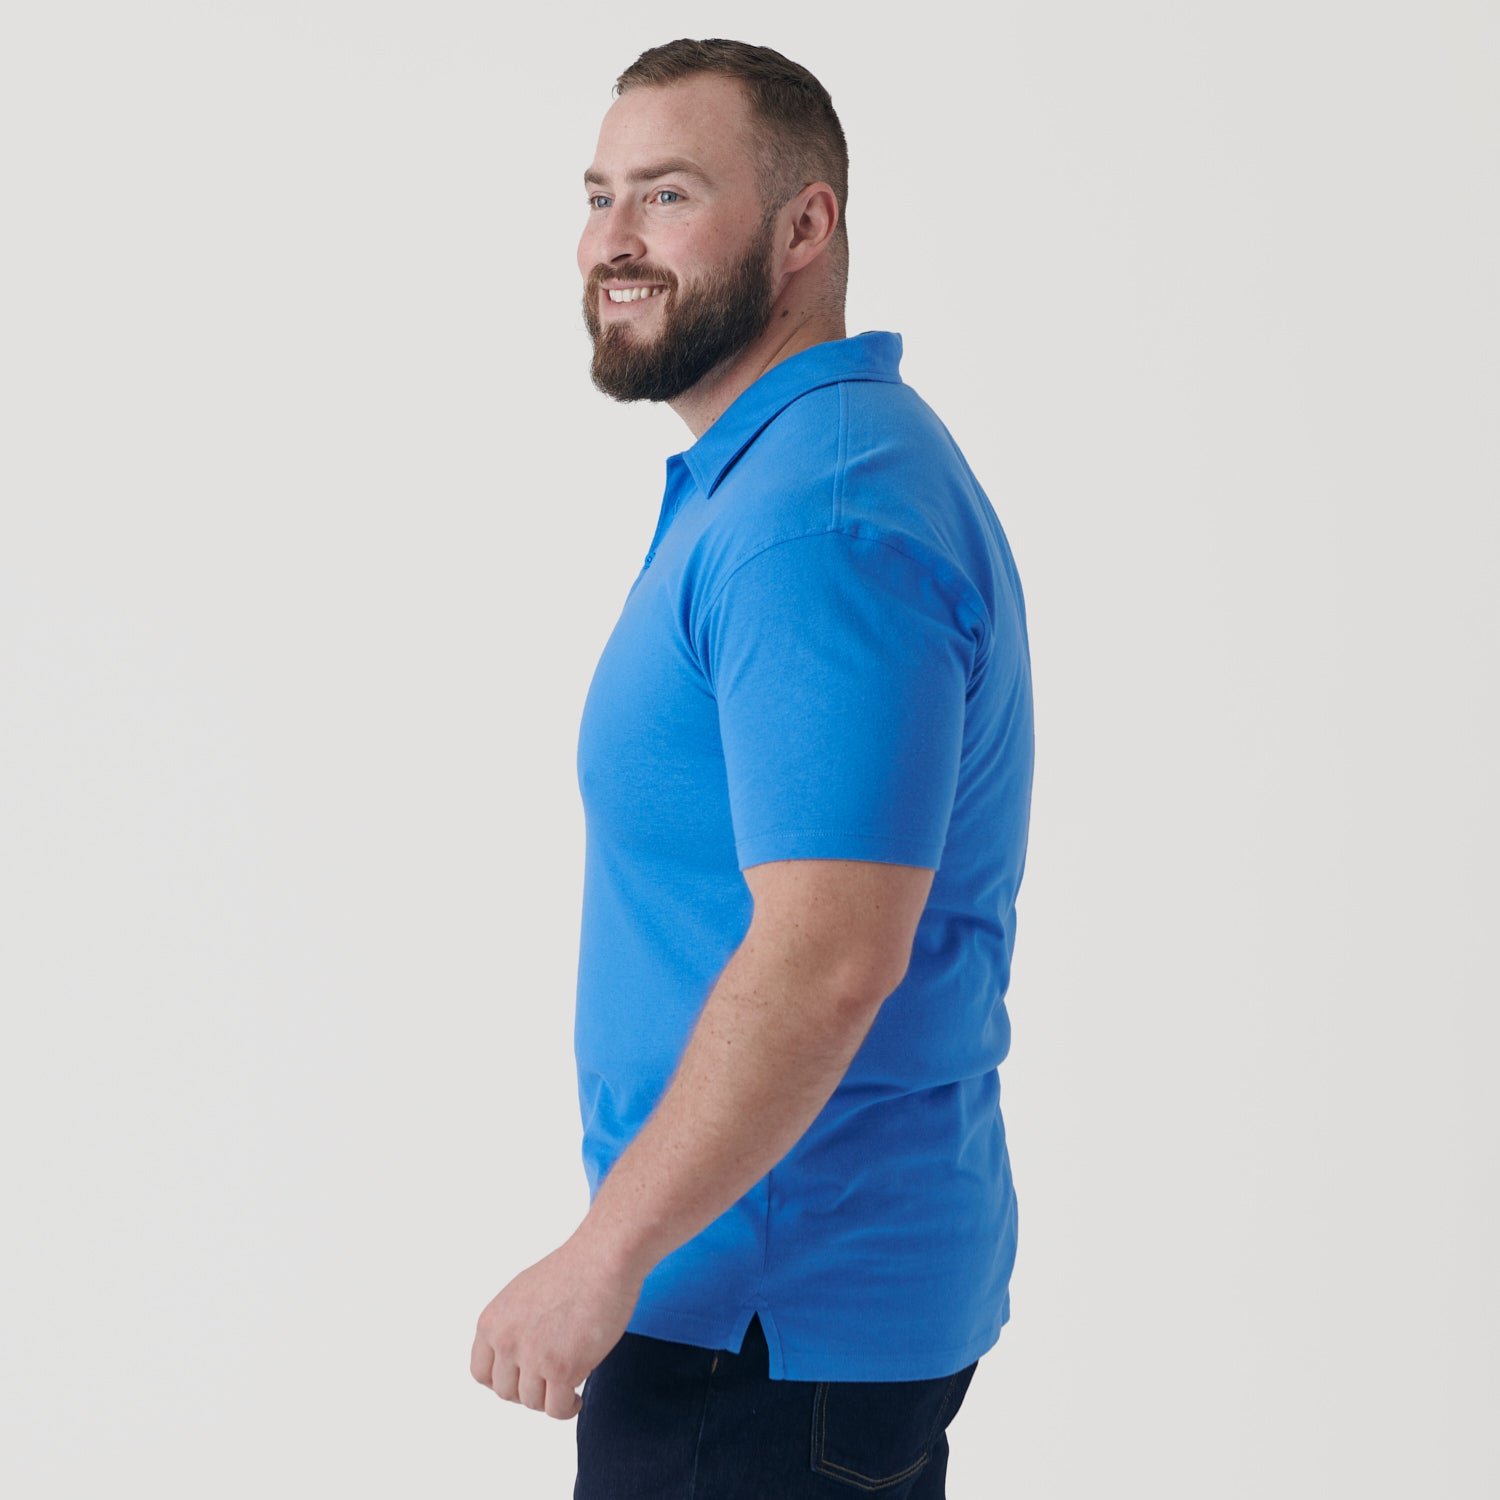 Periwinkle Blue Polo